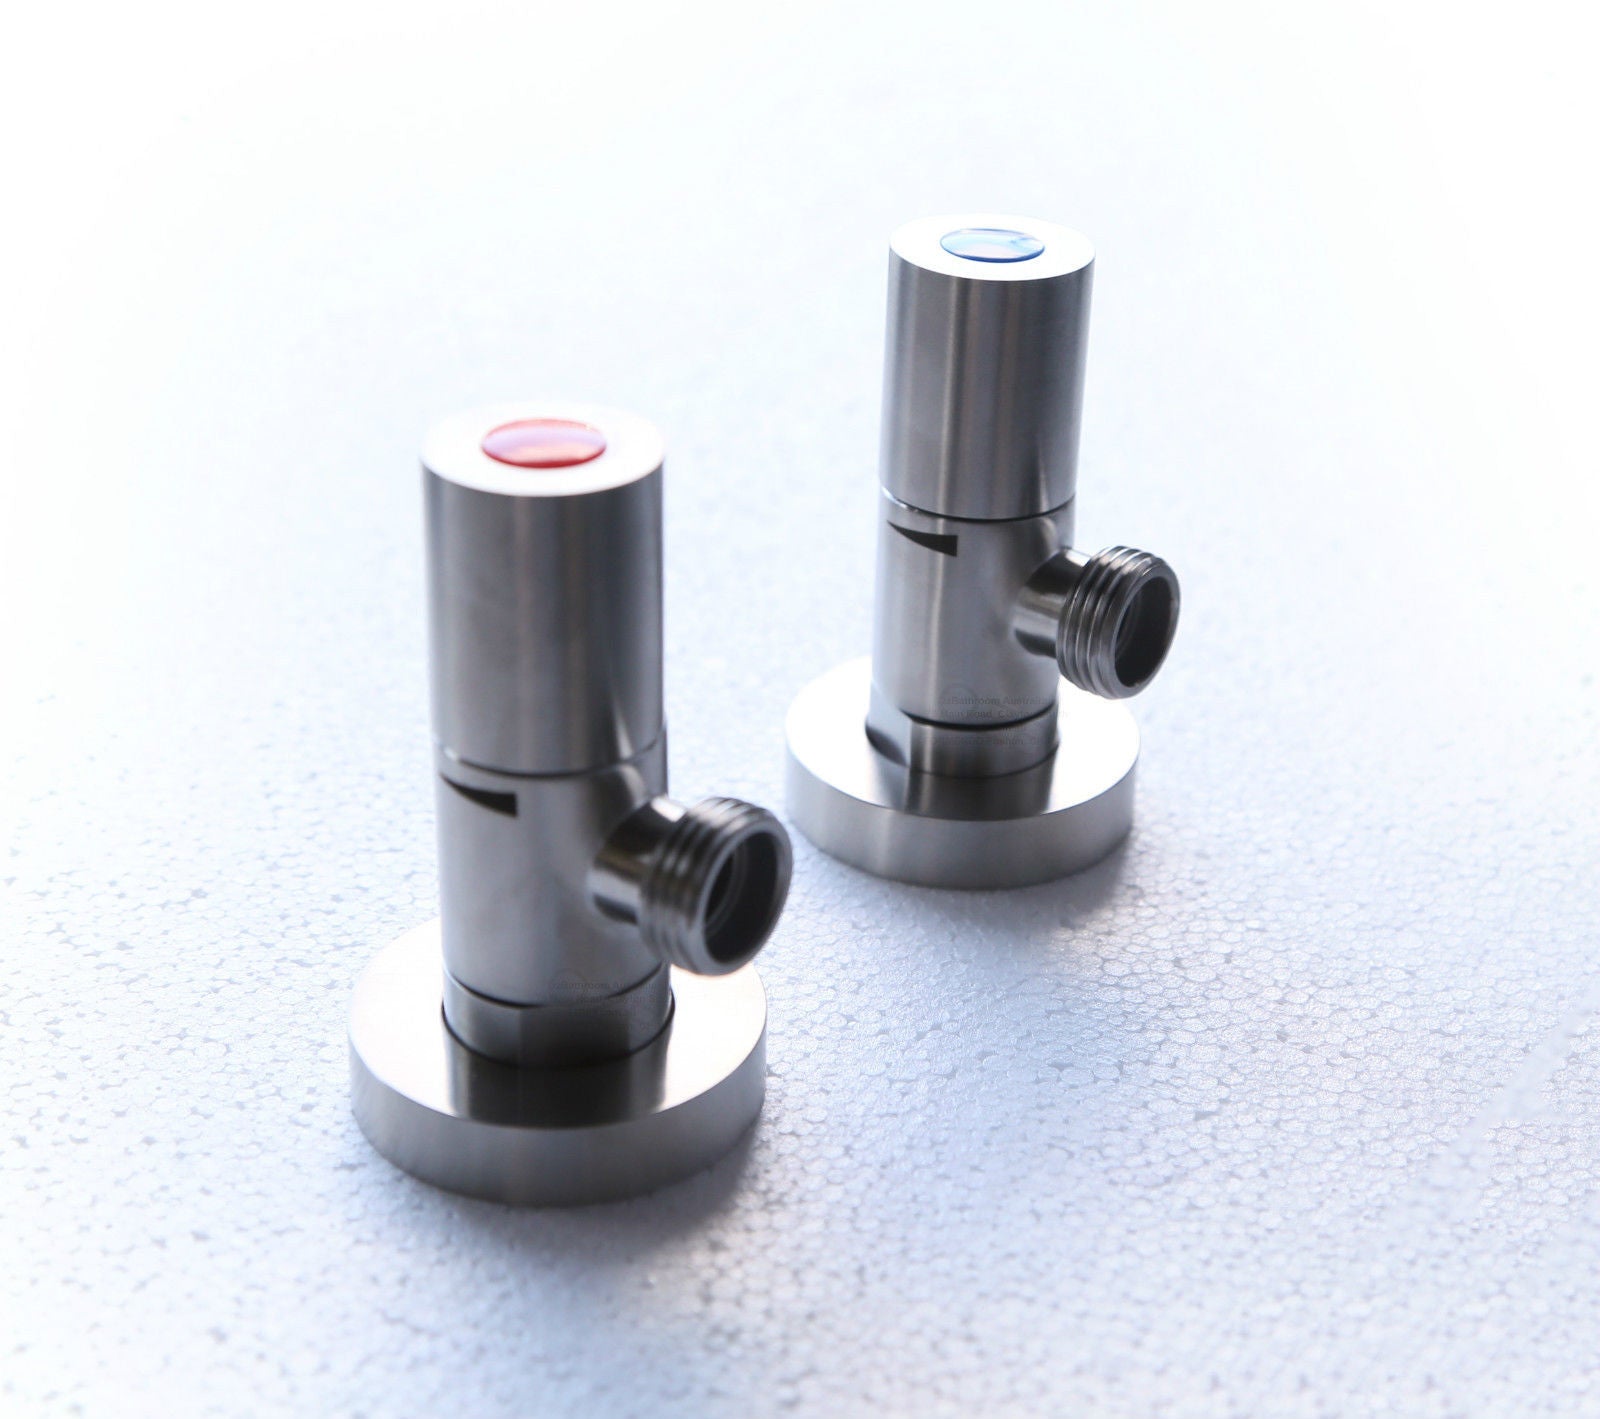 Stainless Steel Angle Valve - Lead-free for white bathroom